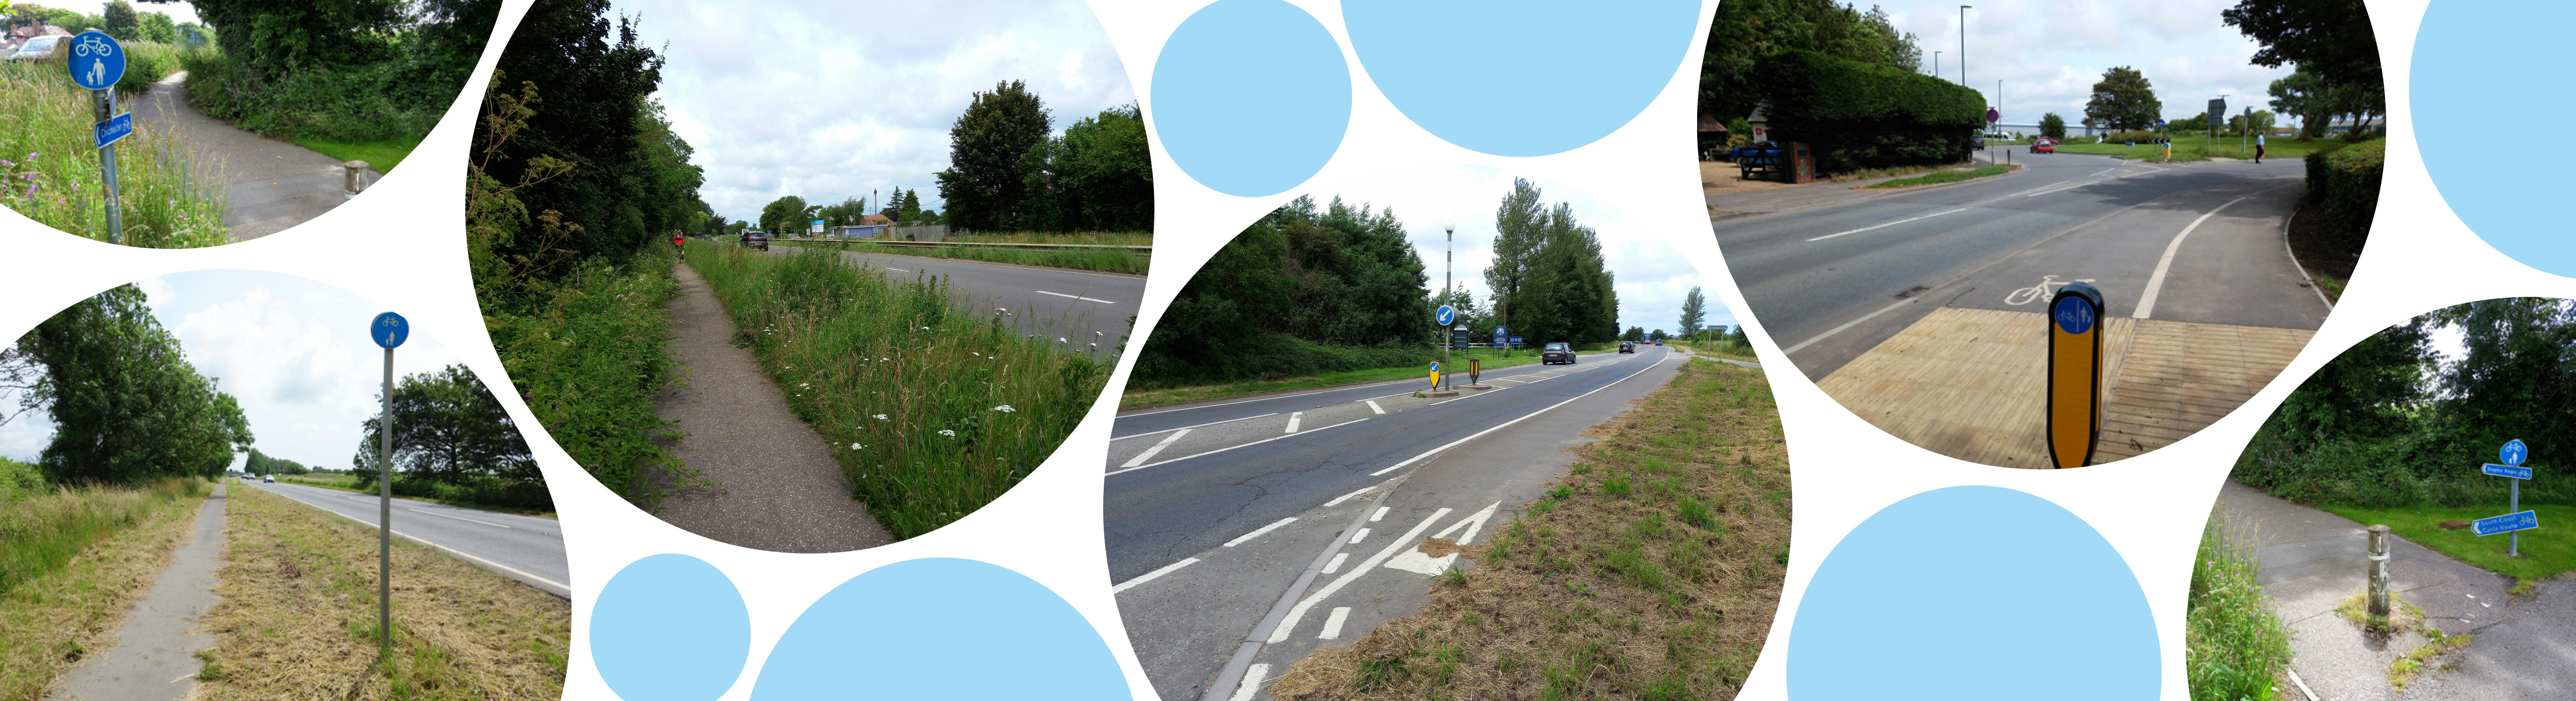 Different images of the highway, footways and cycle pathways along the A259 Chichester to Bognor Regis corridor.